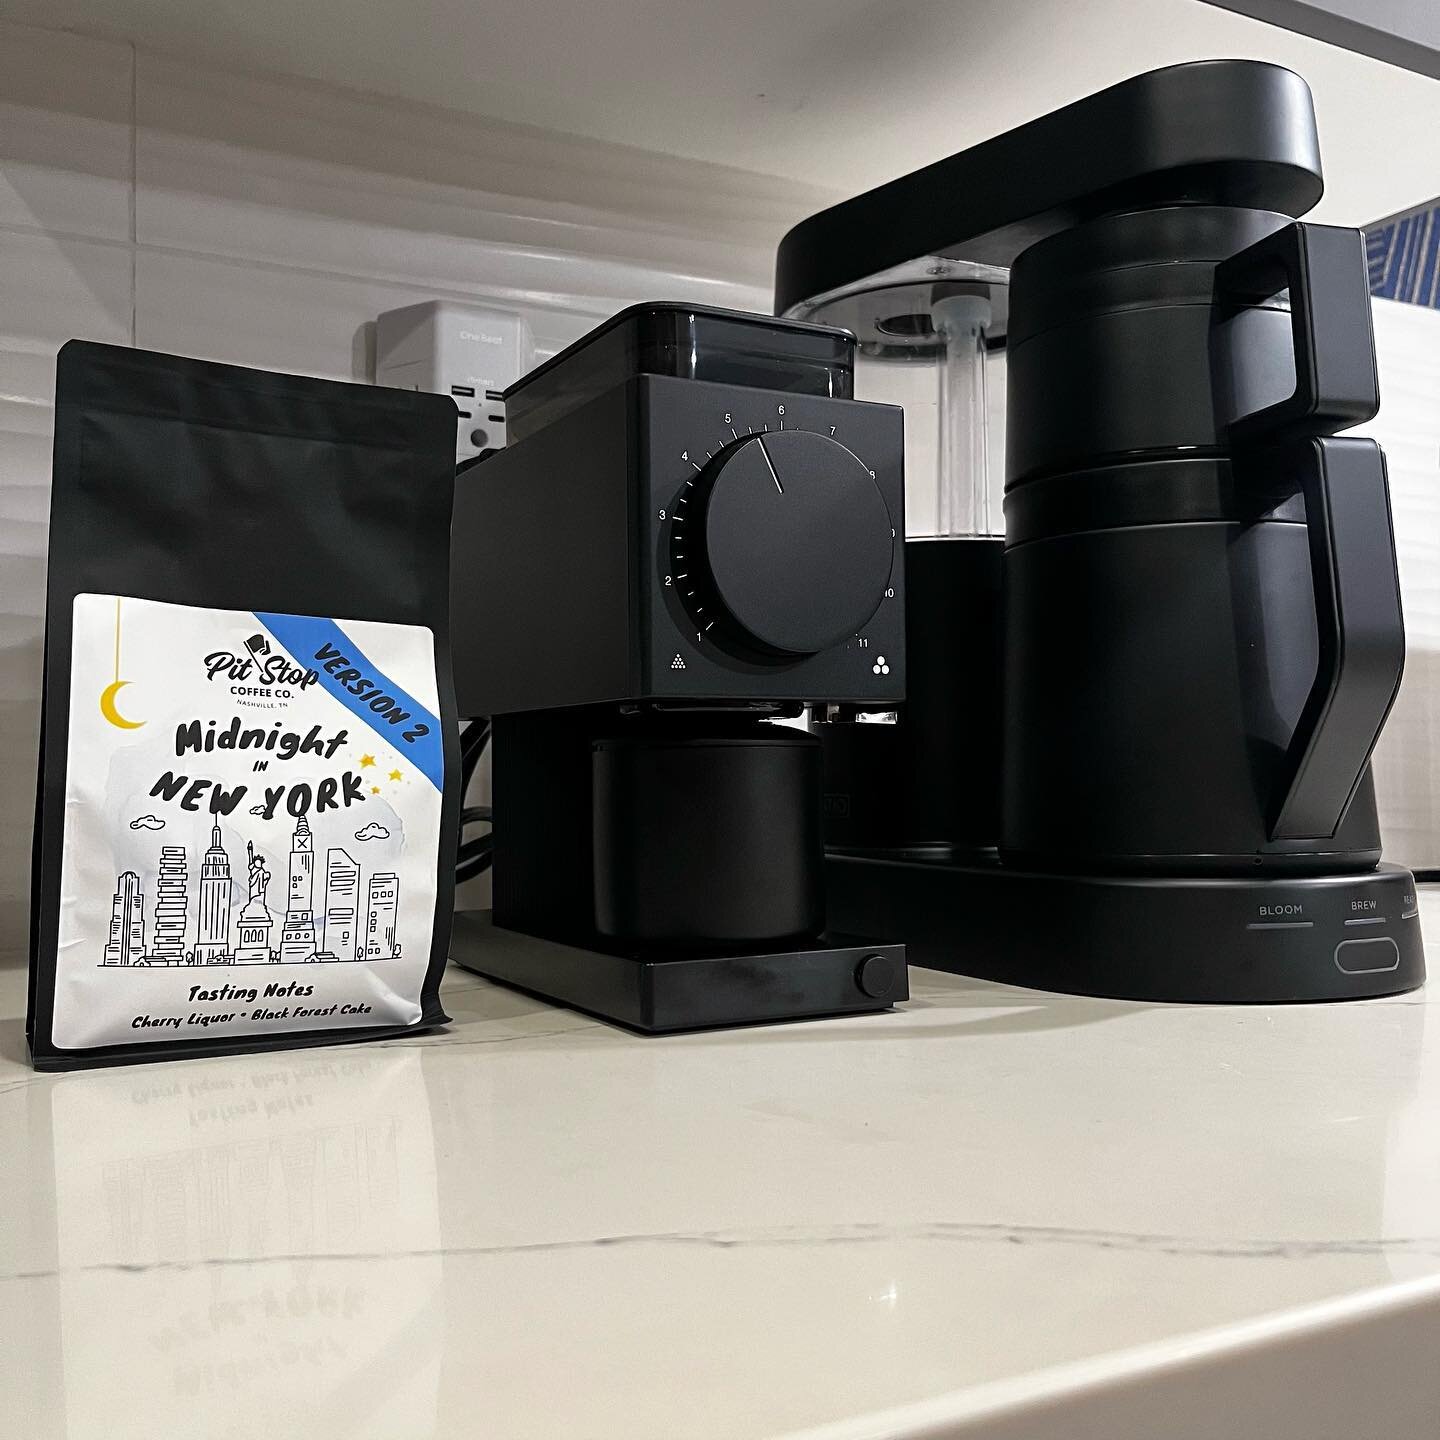 Getting our first Airbnb account fueled up with incredible micro-lot coffee!
-
The @ratiocoffee batch brewer and @fellowproducts Ode grinder are a match made in heaven ❤️&zwj;🔥 combine it with our micro lot coffee &amp; you&rsquo;ve got a setup wort